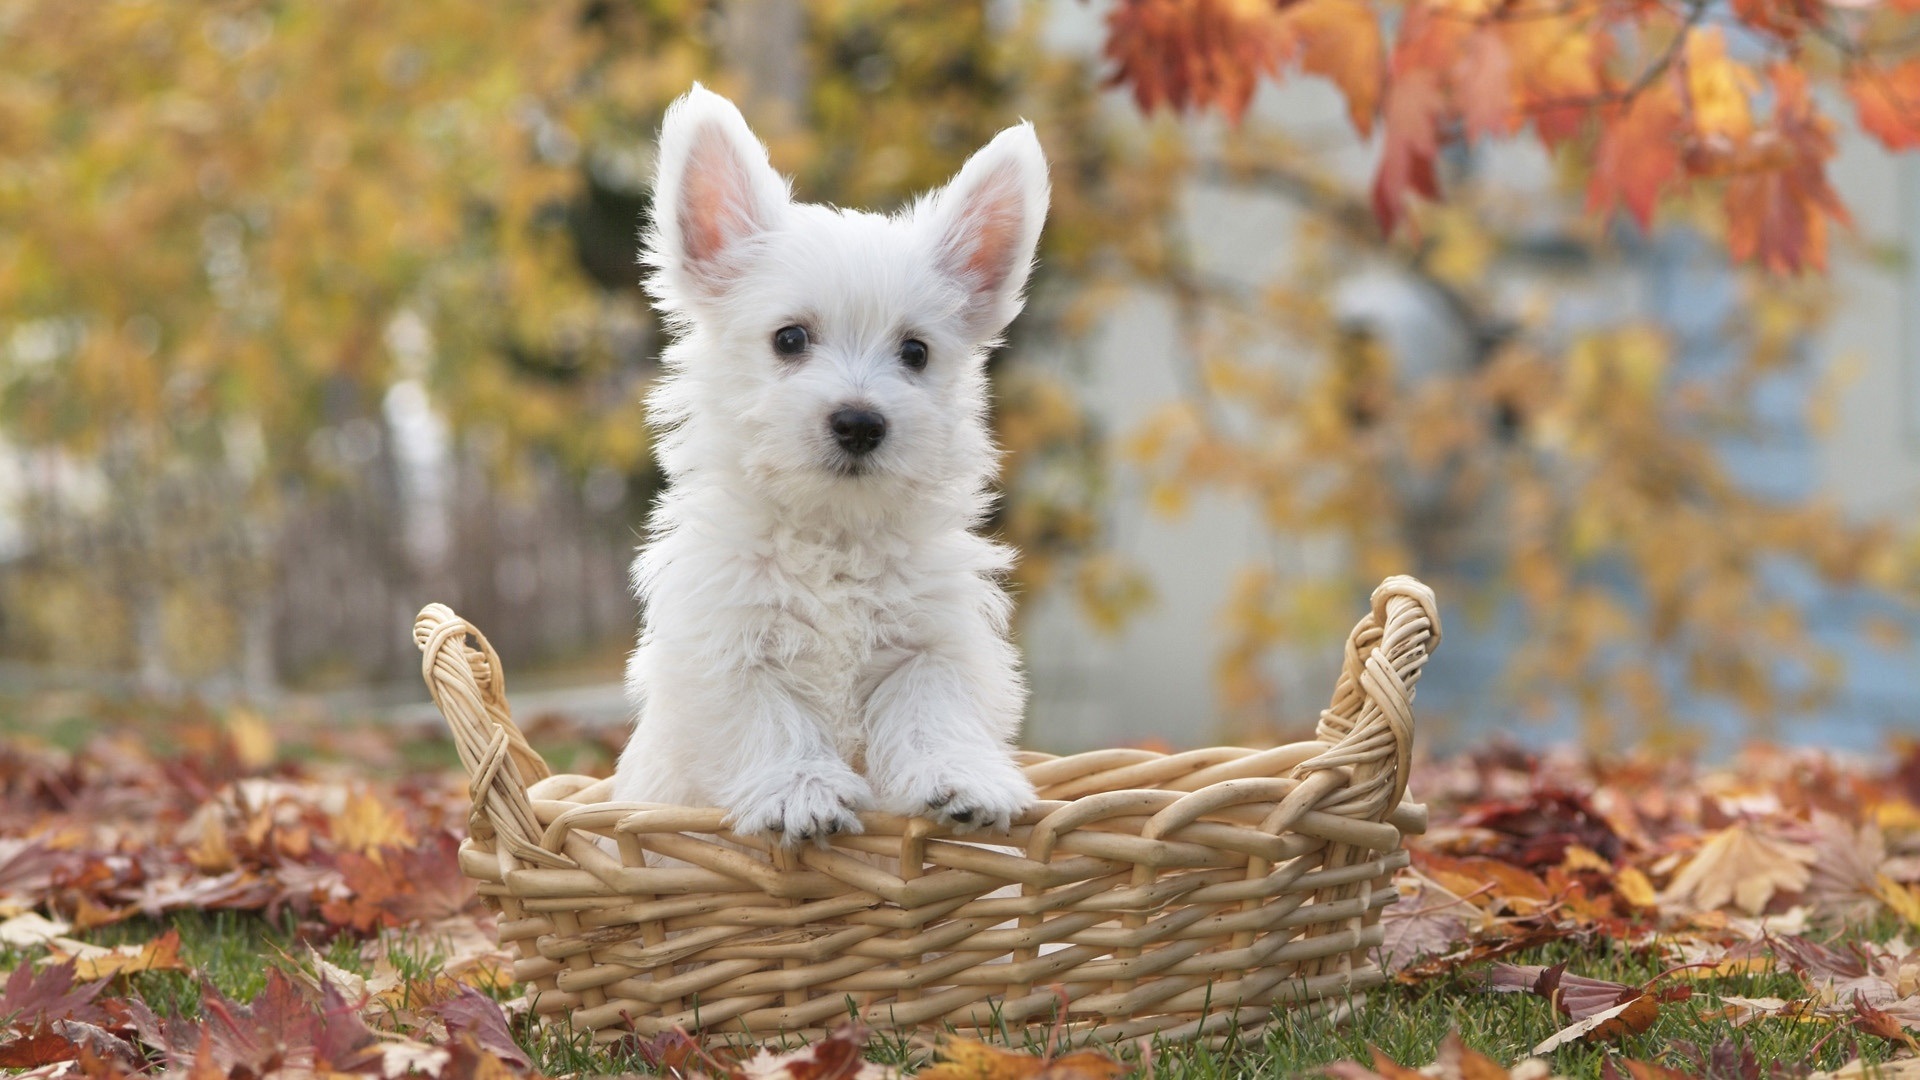 General 1920x1080 dog baskets fall grass leaves trees plants nature animals